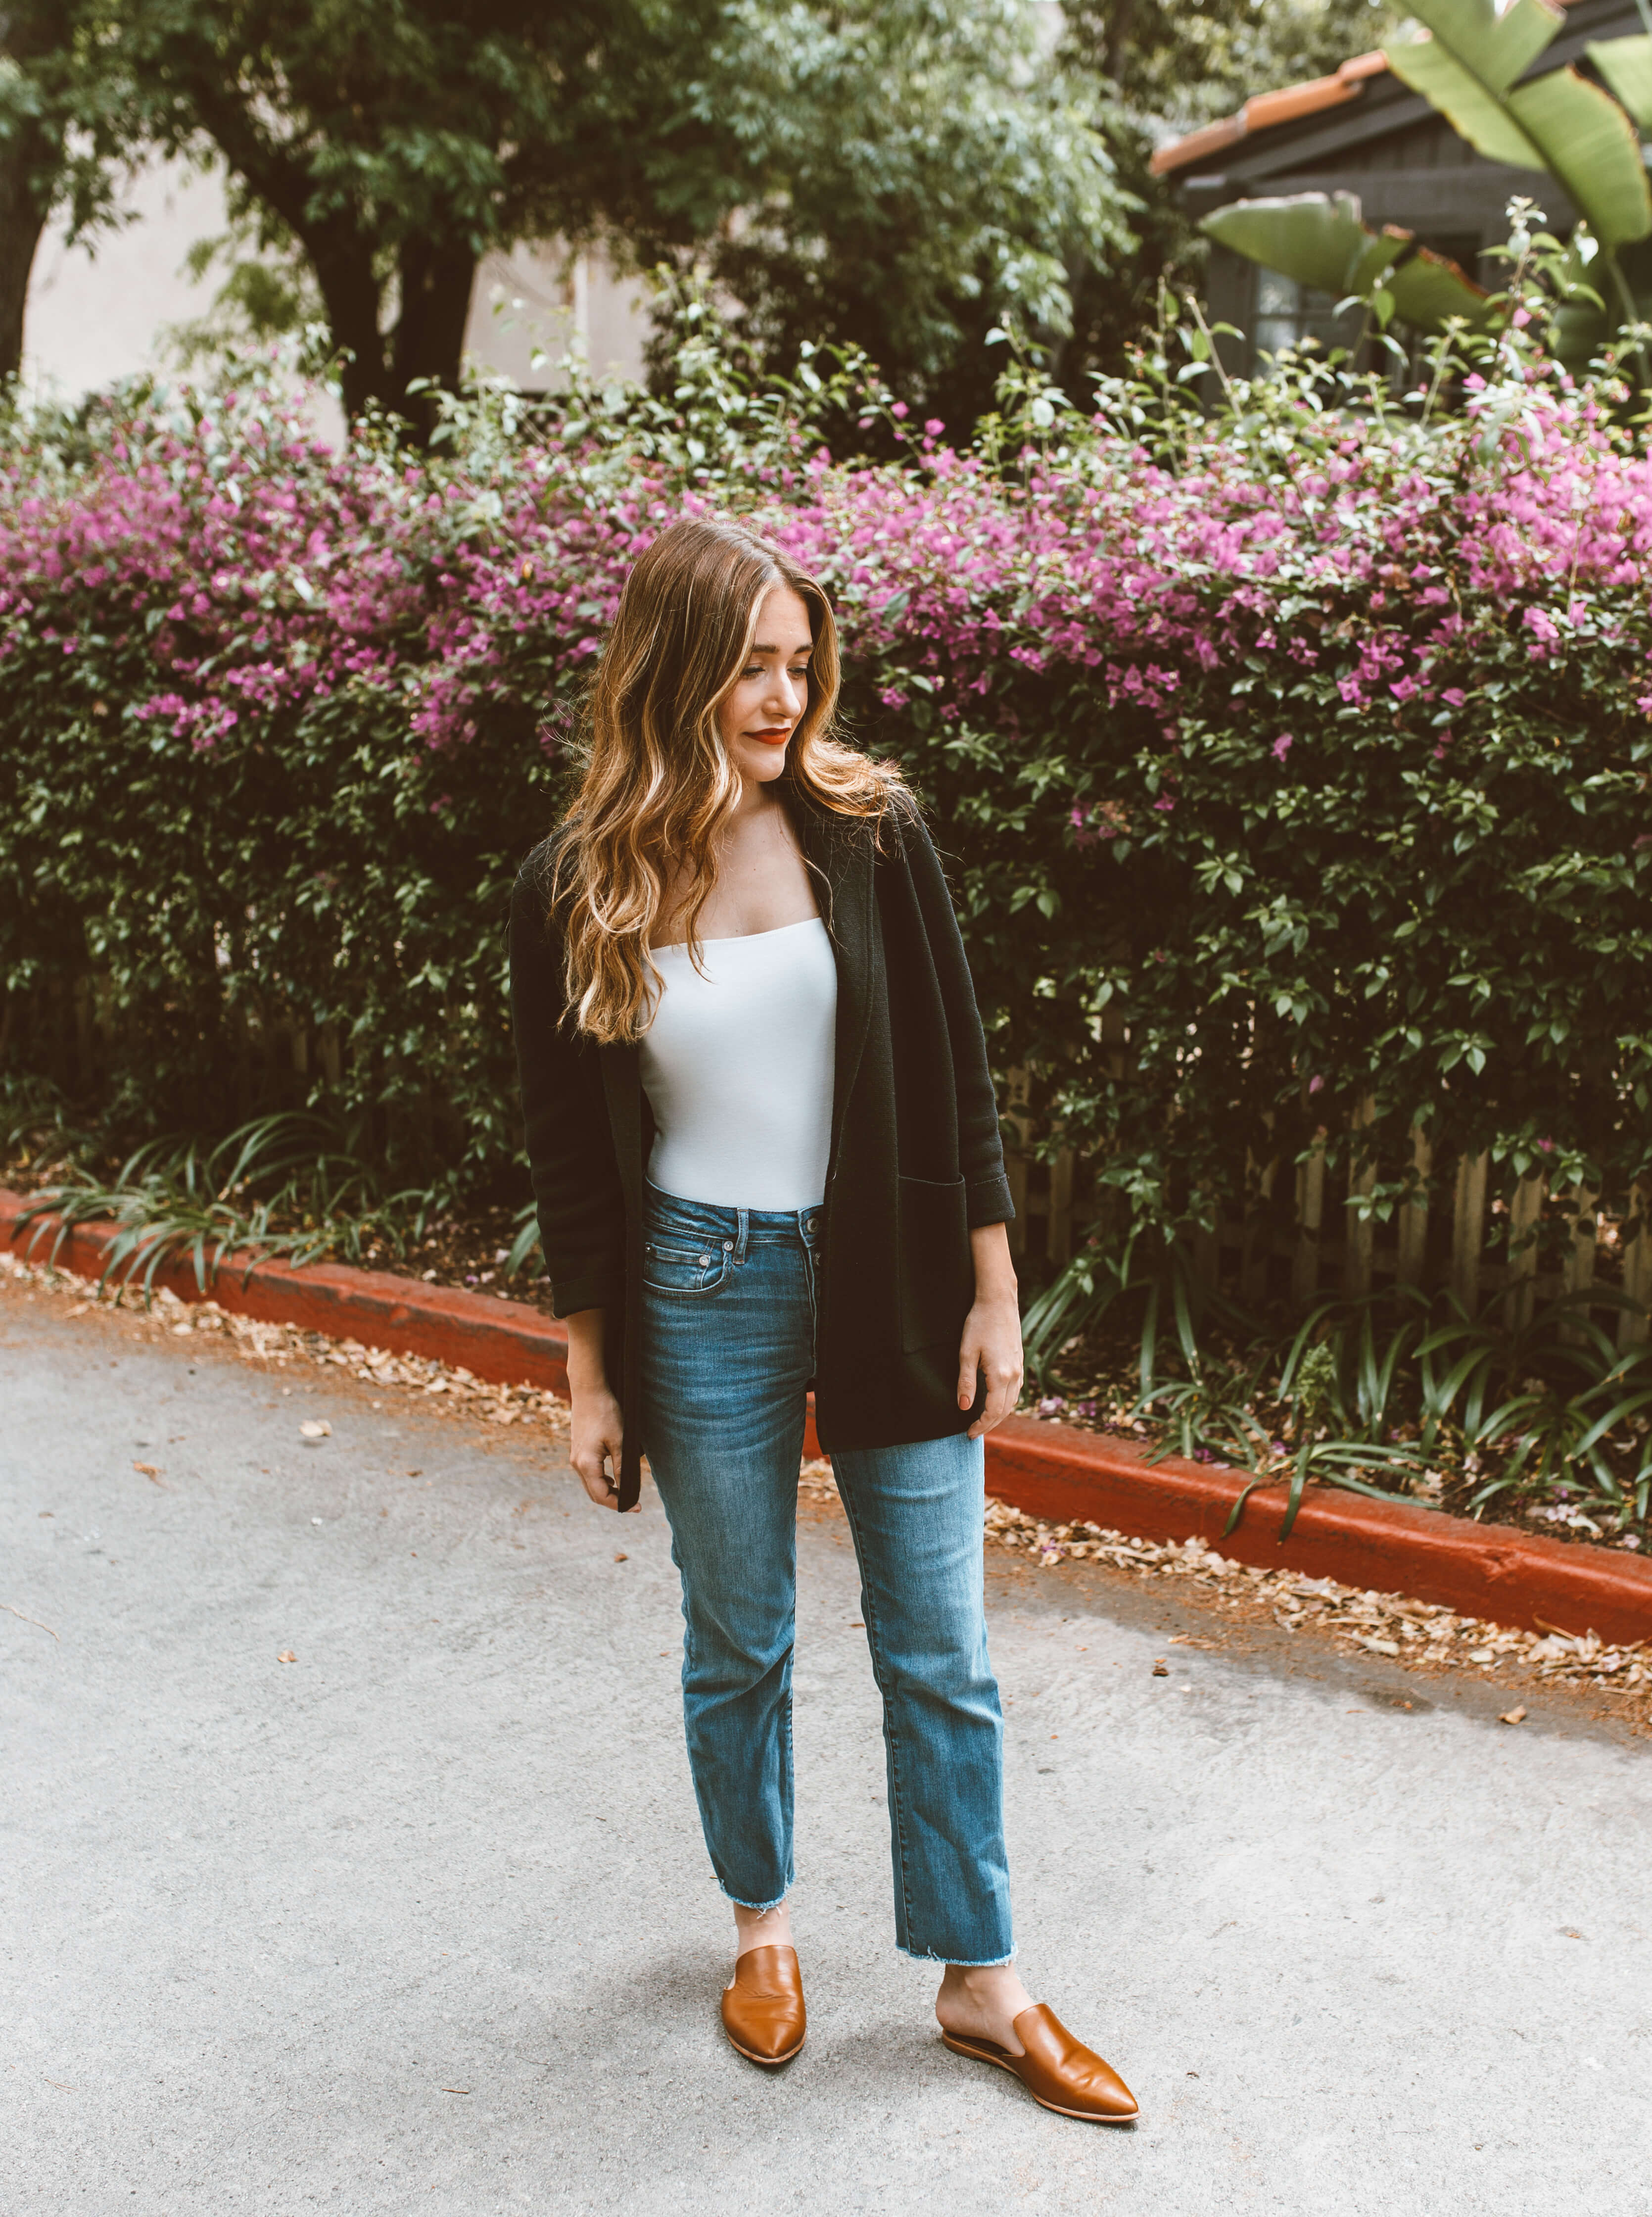 The Lightweight Blazer You Need For Spring | Twinspiration